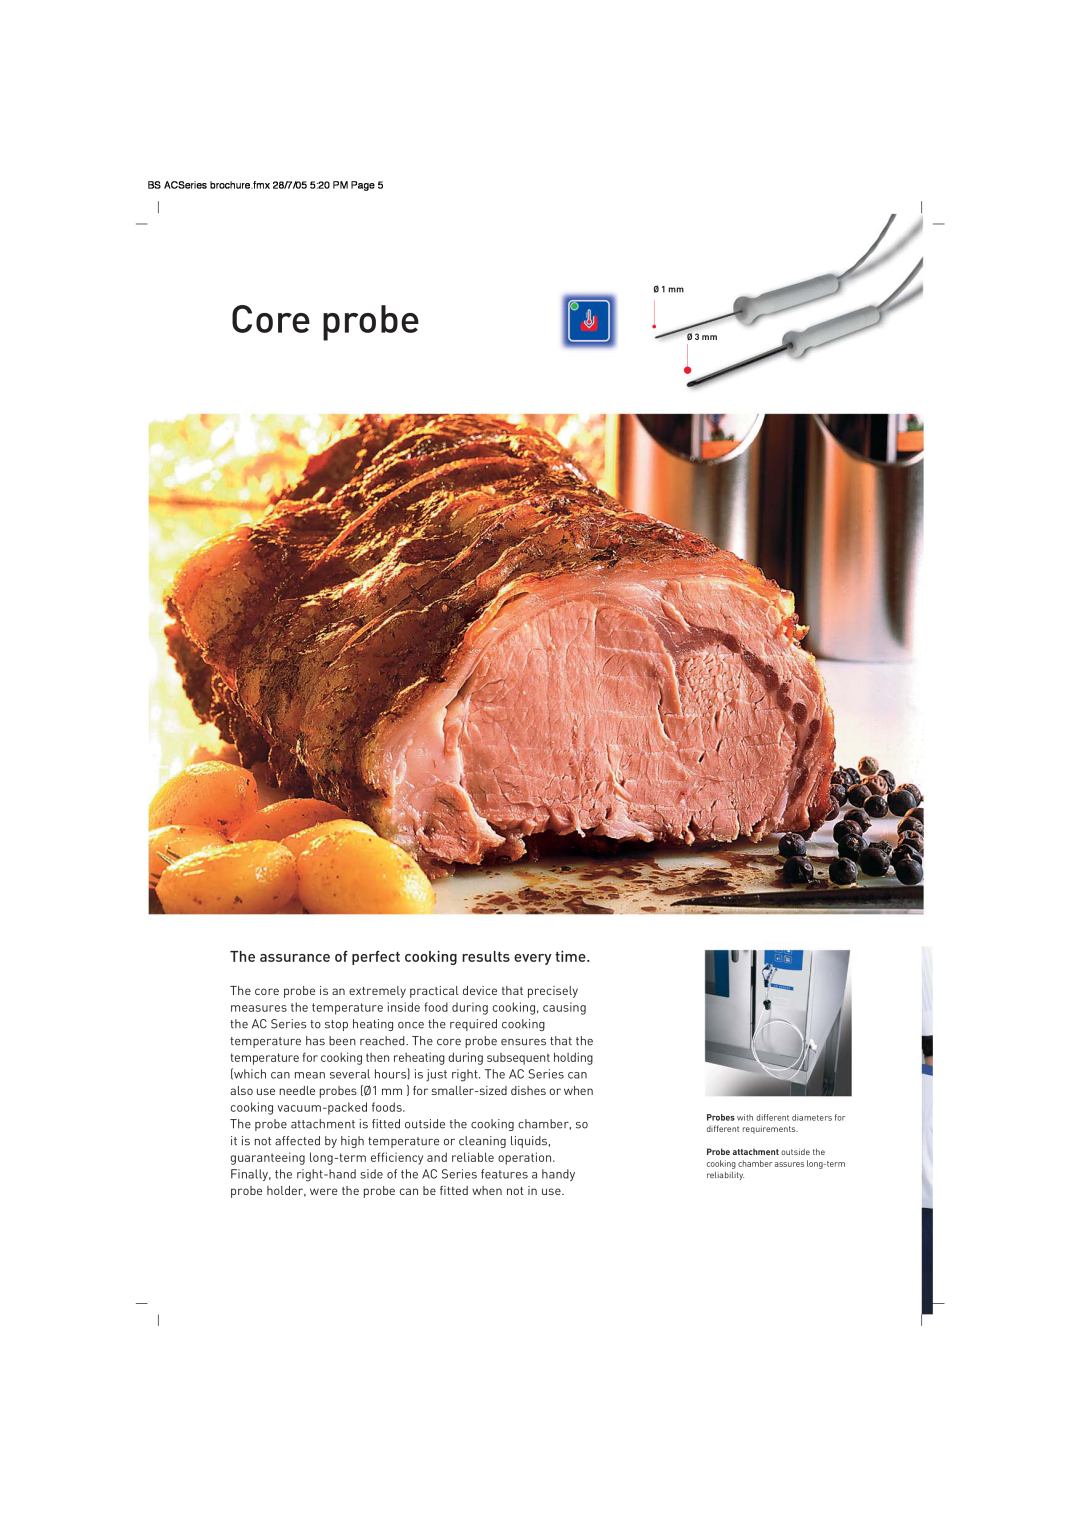 Moffat AC Series brochure Core probe, The assurance of perfect cooking results every time 